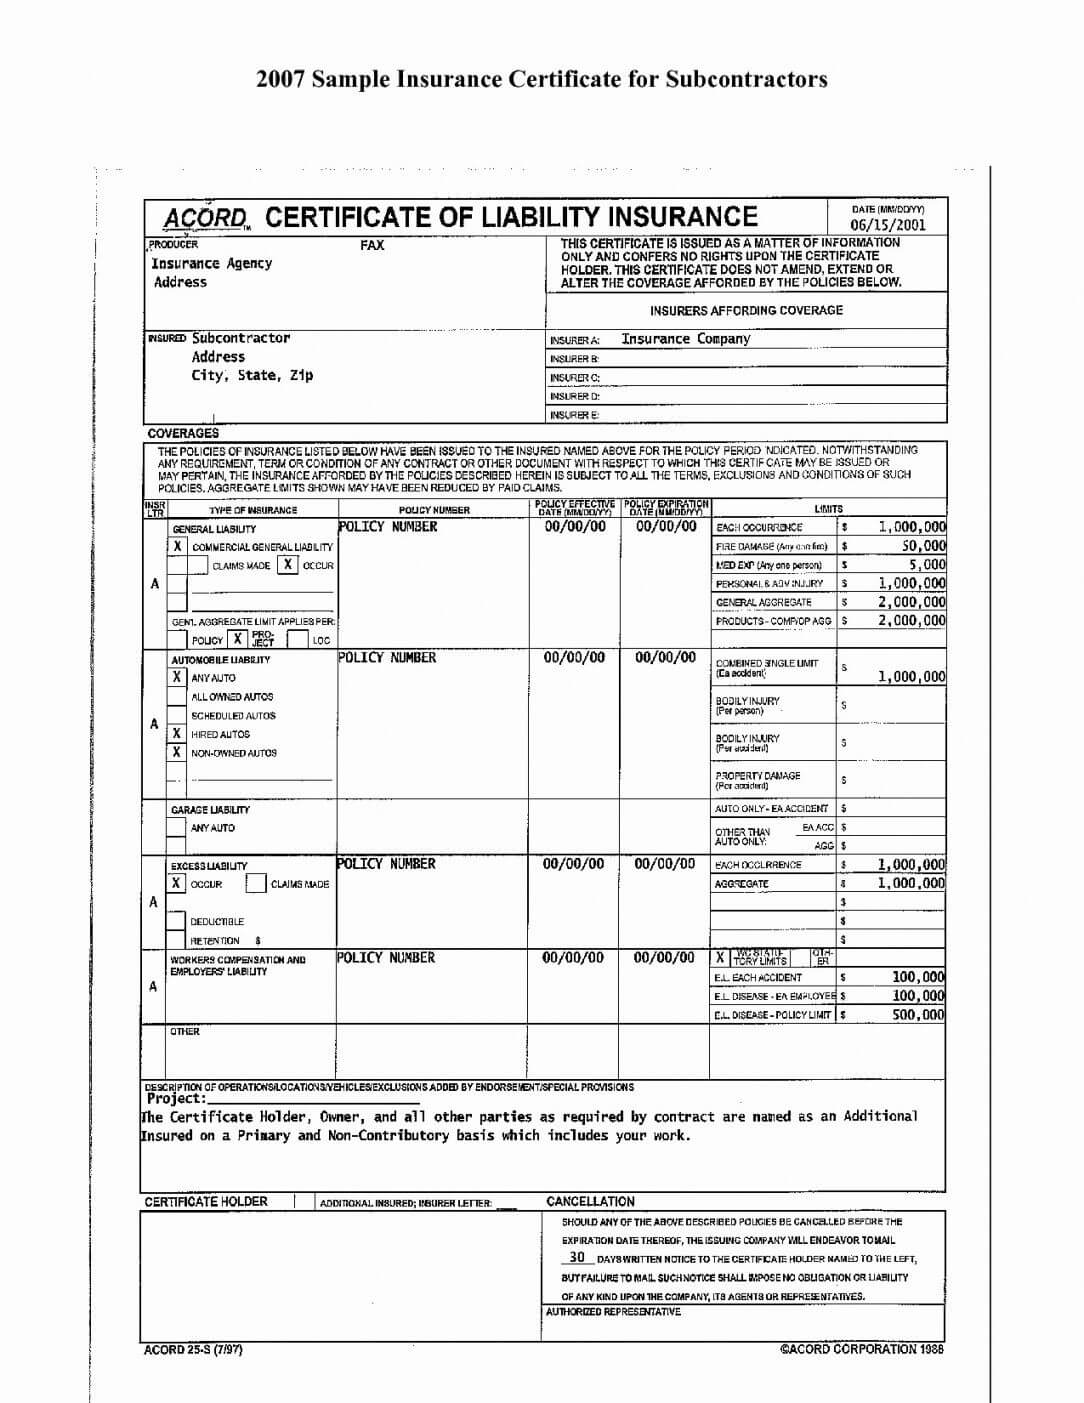 Editable Form Ificate Of Liability Insurance What Is With Certificate Of Liability Insurance Template